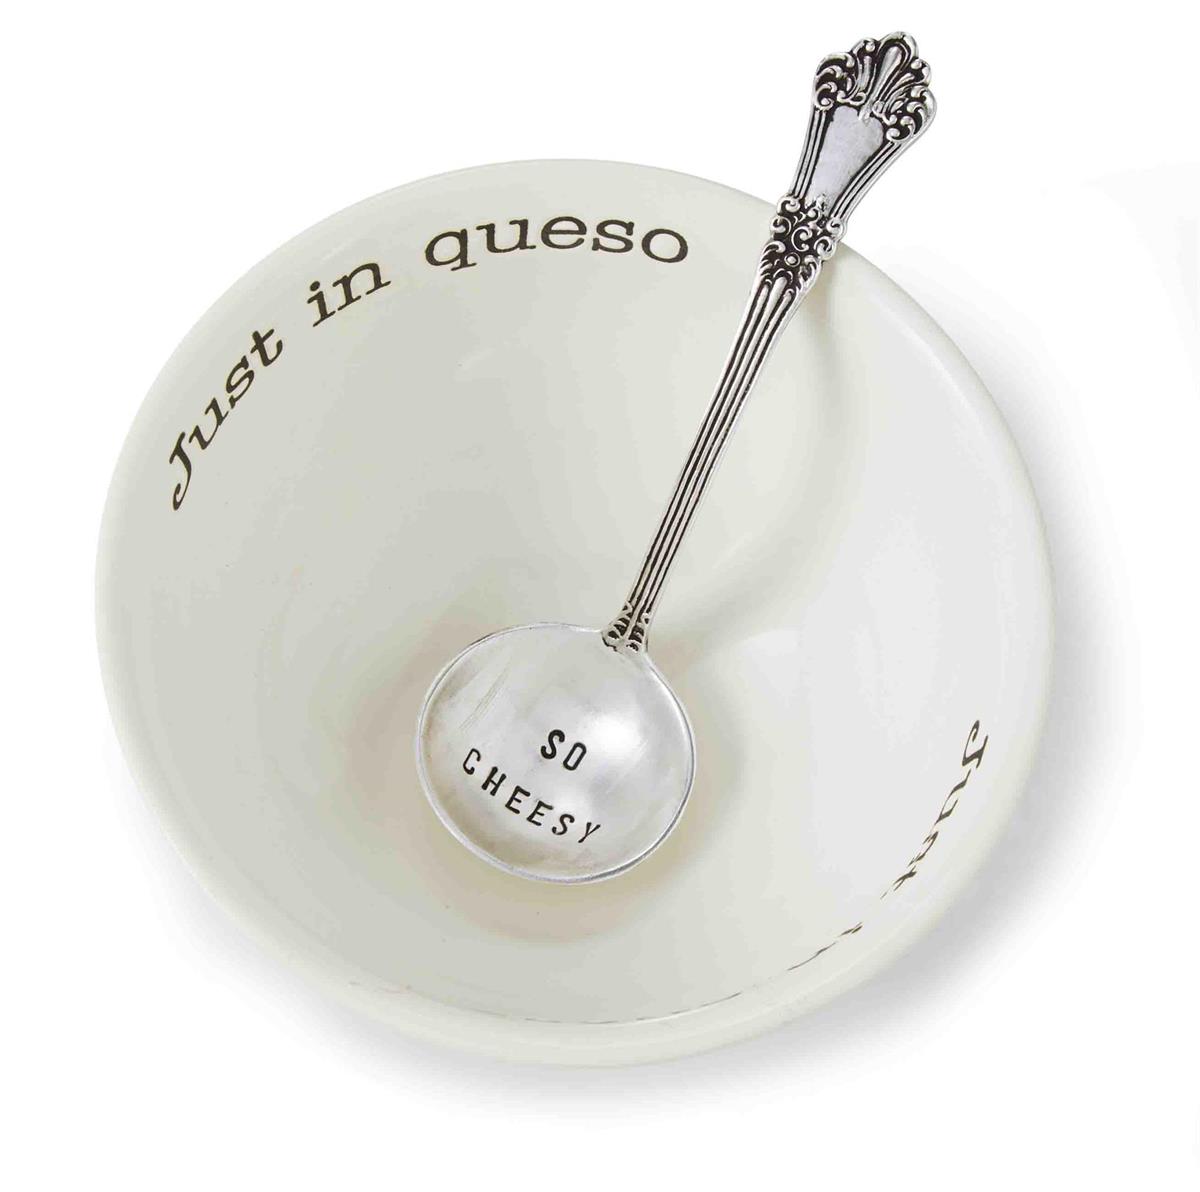 Just In Queso Dip Set - 4851037